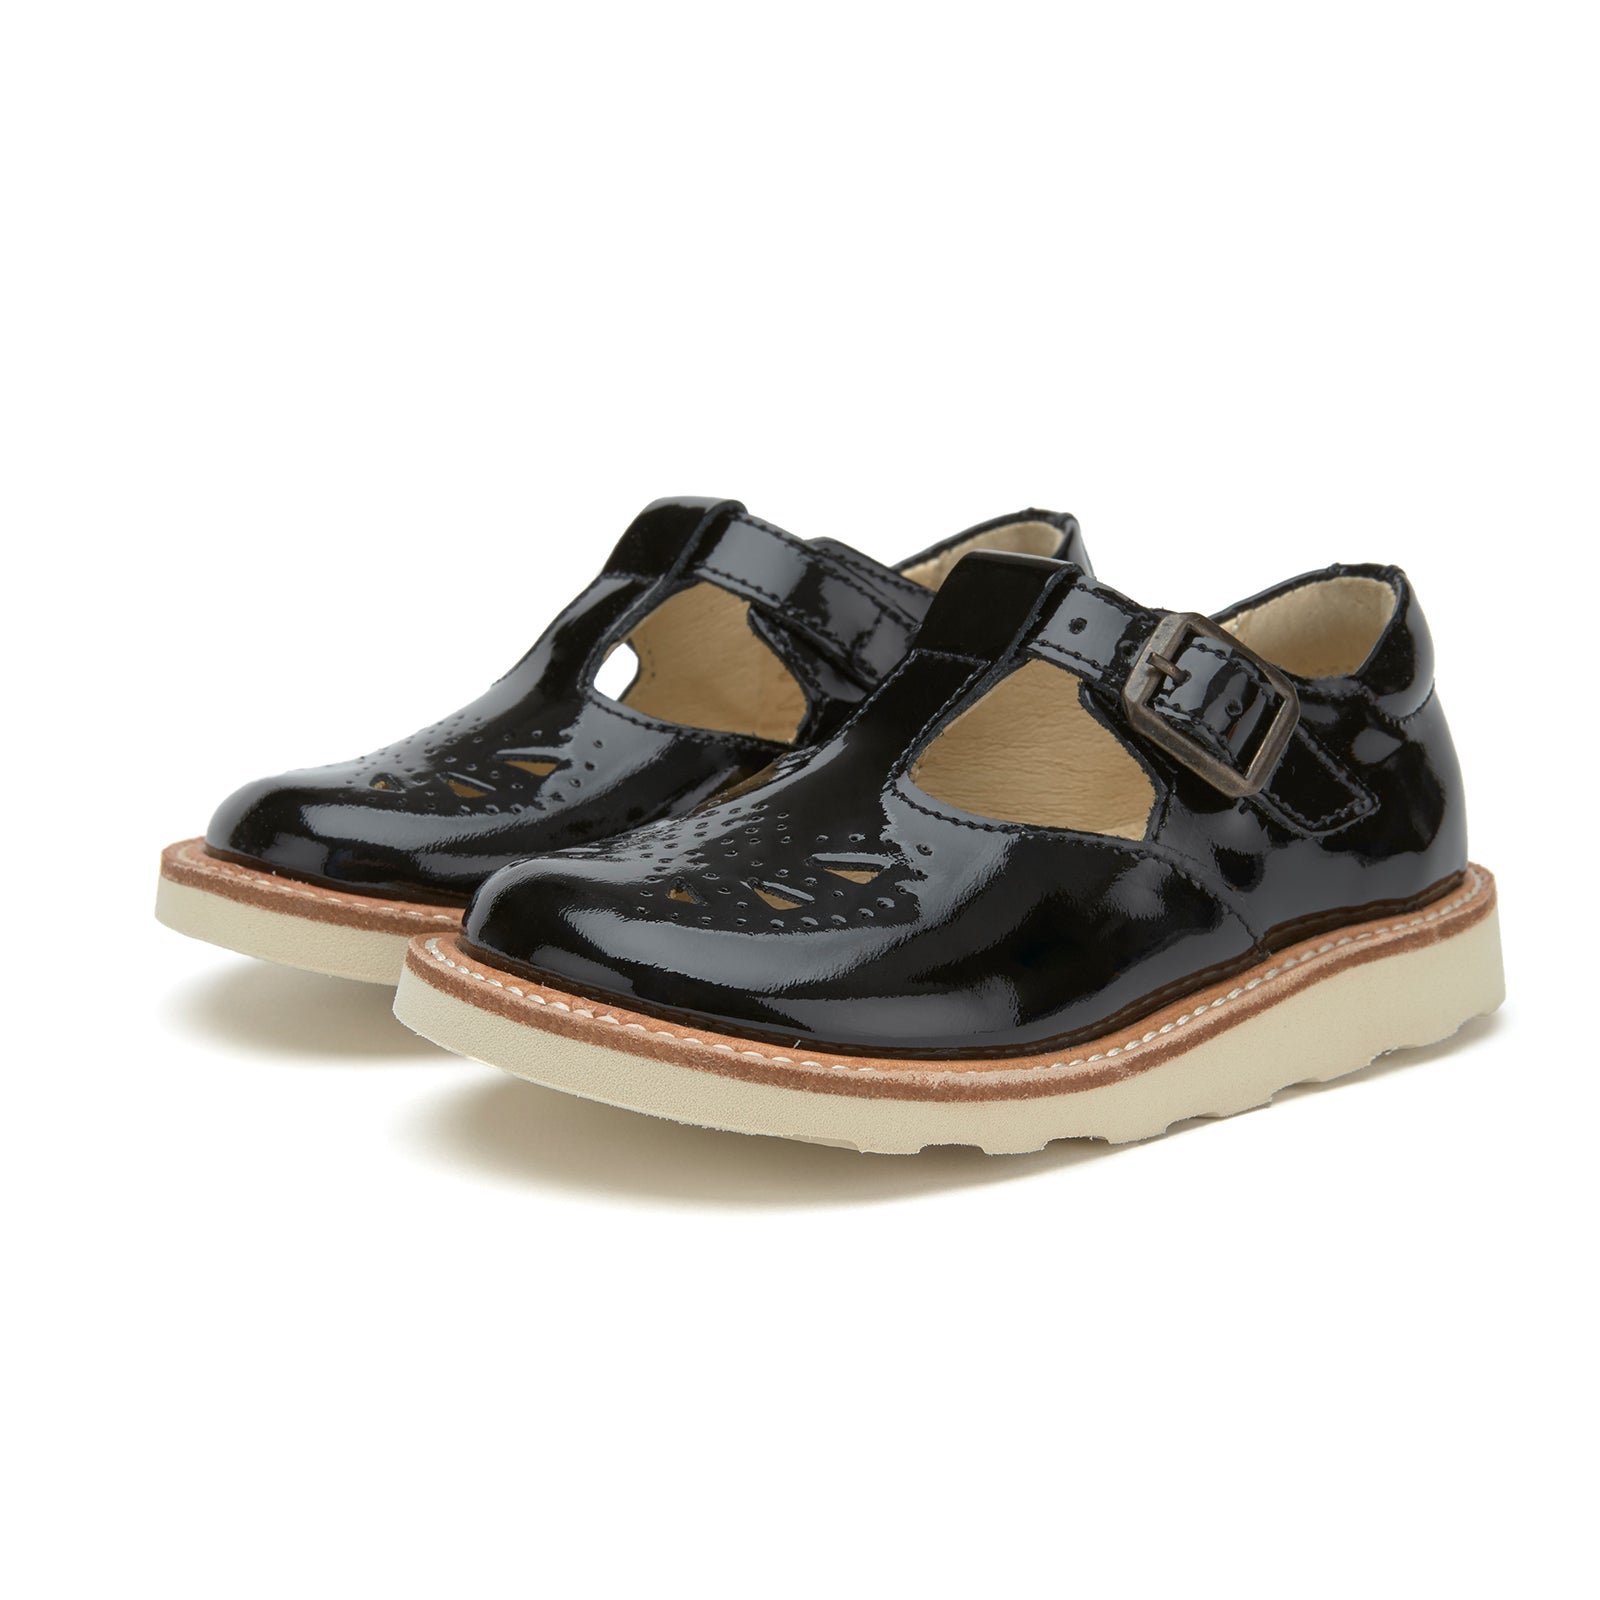 Young Soles Rosie T-Bar Leather Shoes - Black Patent